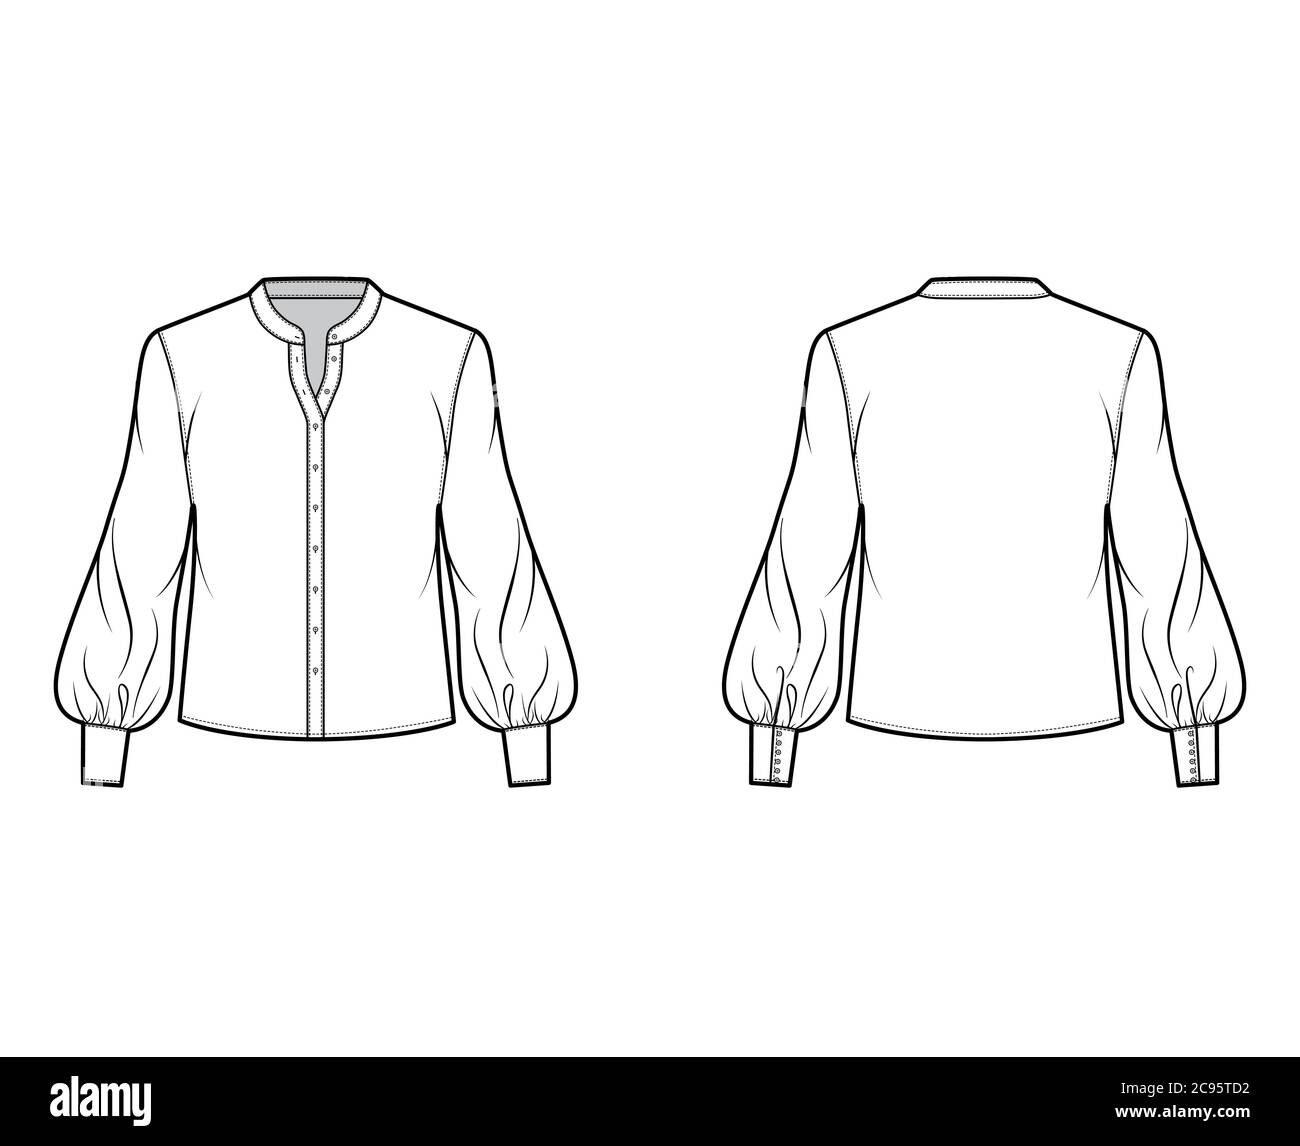 Stand collar shirt technical fashion illustration with long bishop ...